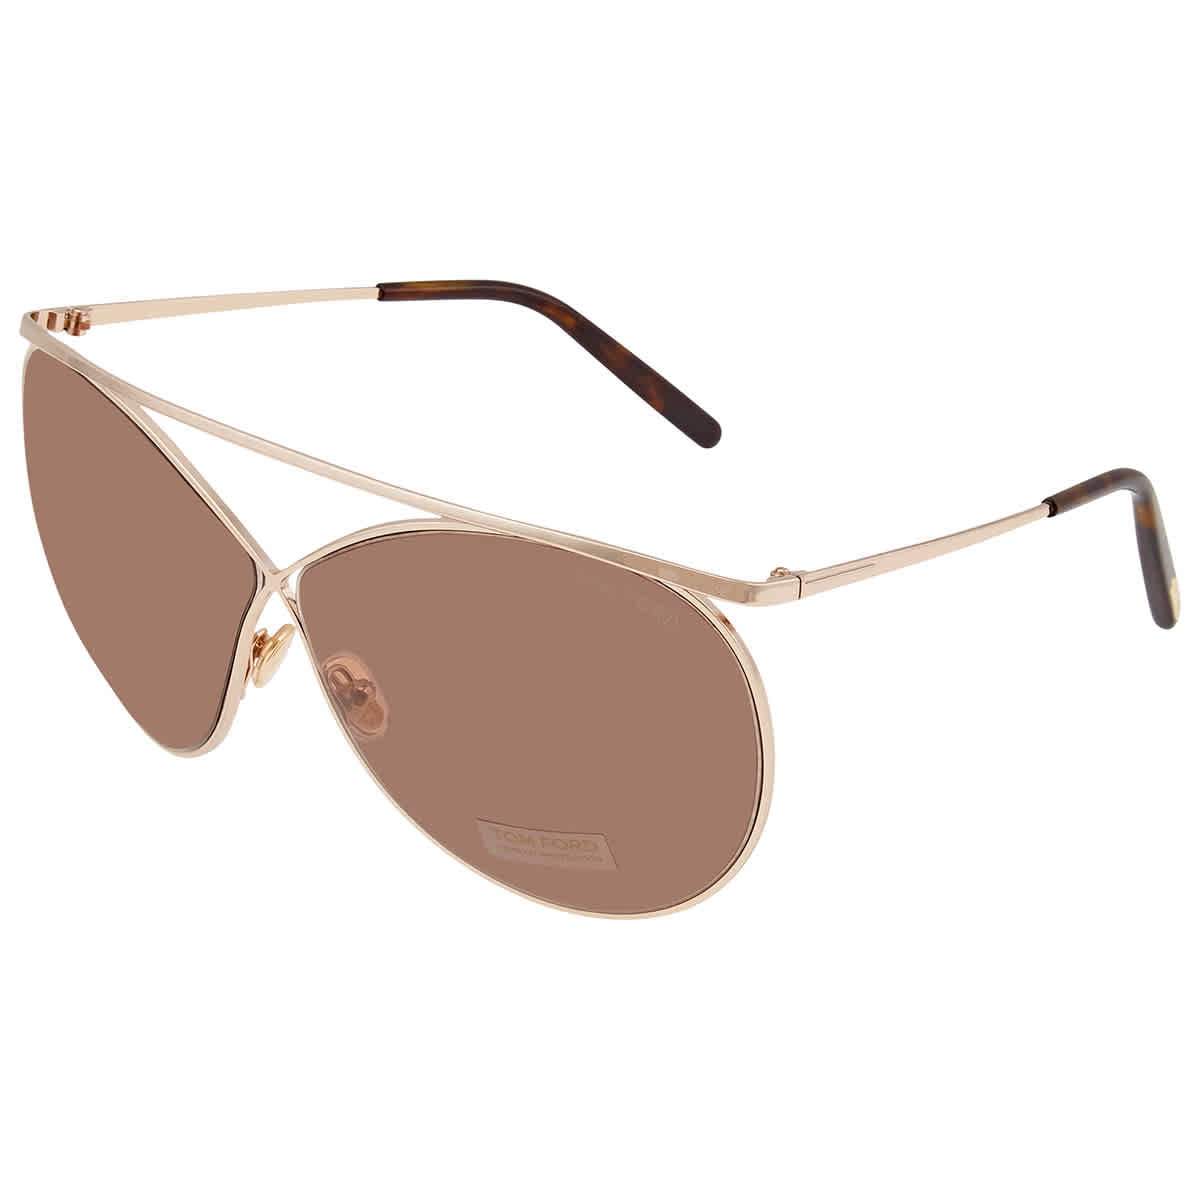 Sunglasses Tom Ford FT 0654 Zeila 28F shiny rose gold/gradient brown 